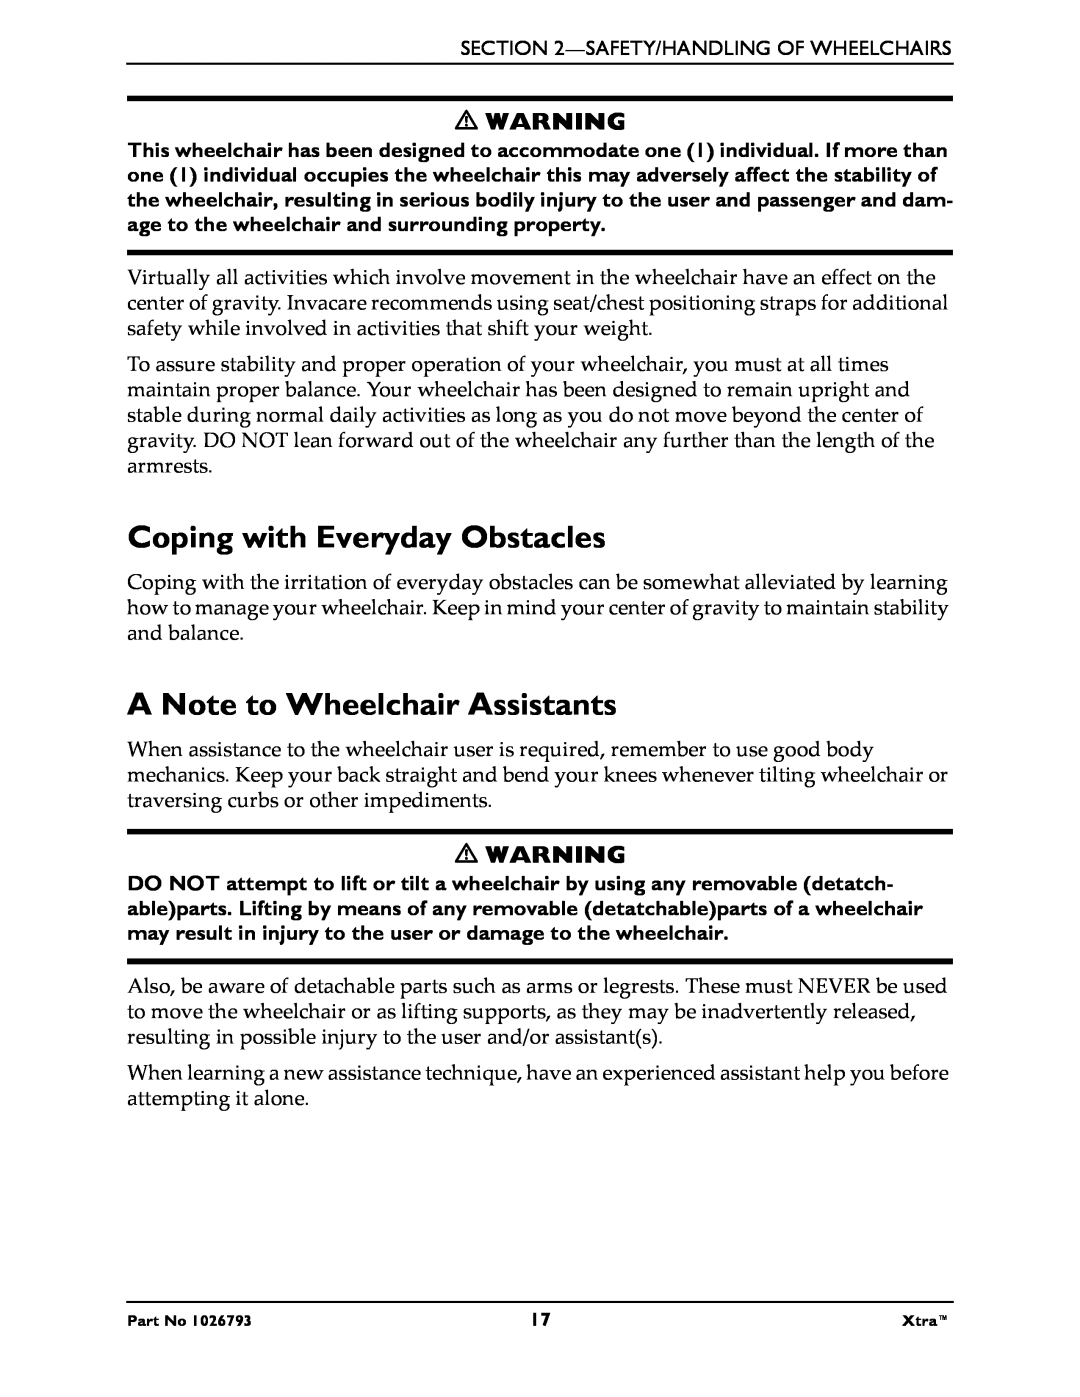 Invacare 1026793 manual Coping with Everyday Obstacles, A Note to Wheelchair Assistants 